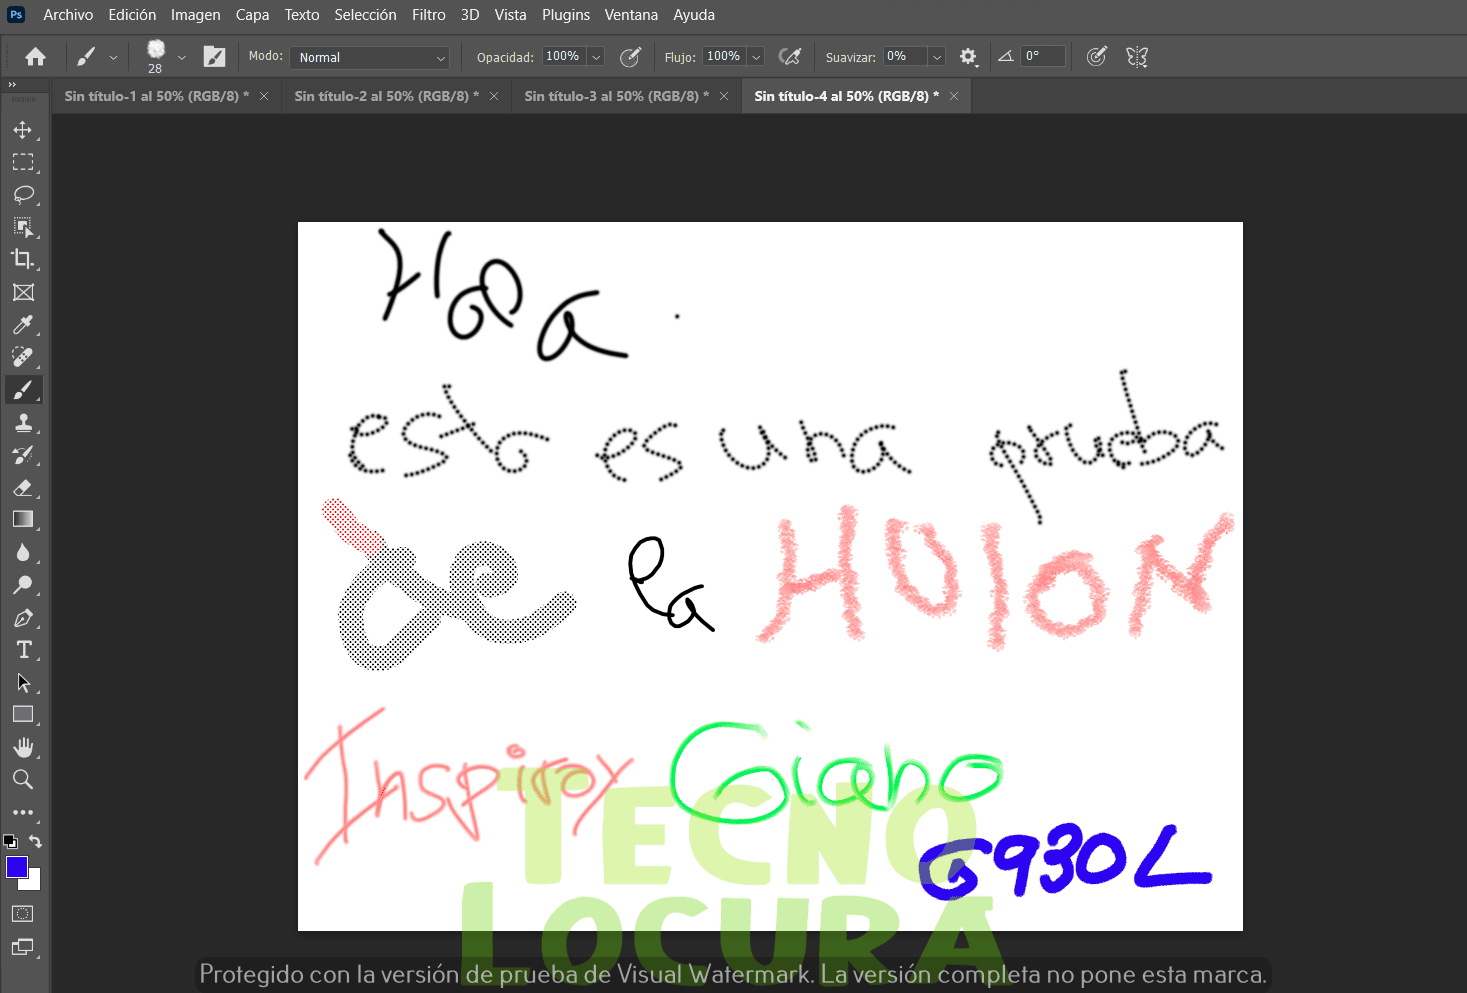 HUION Inspiroy Giano G930L